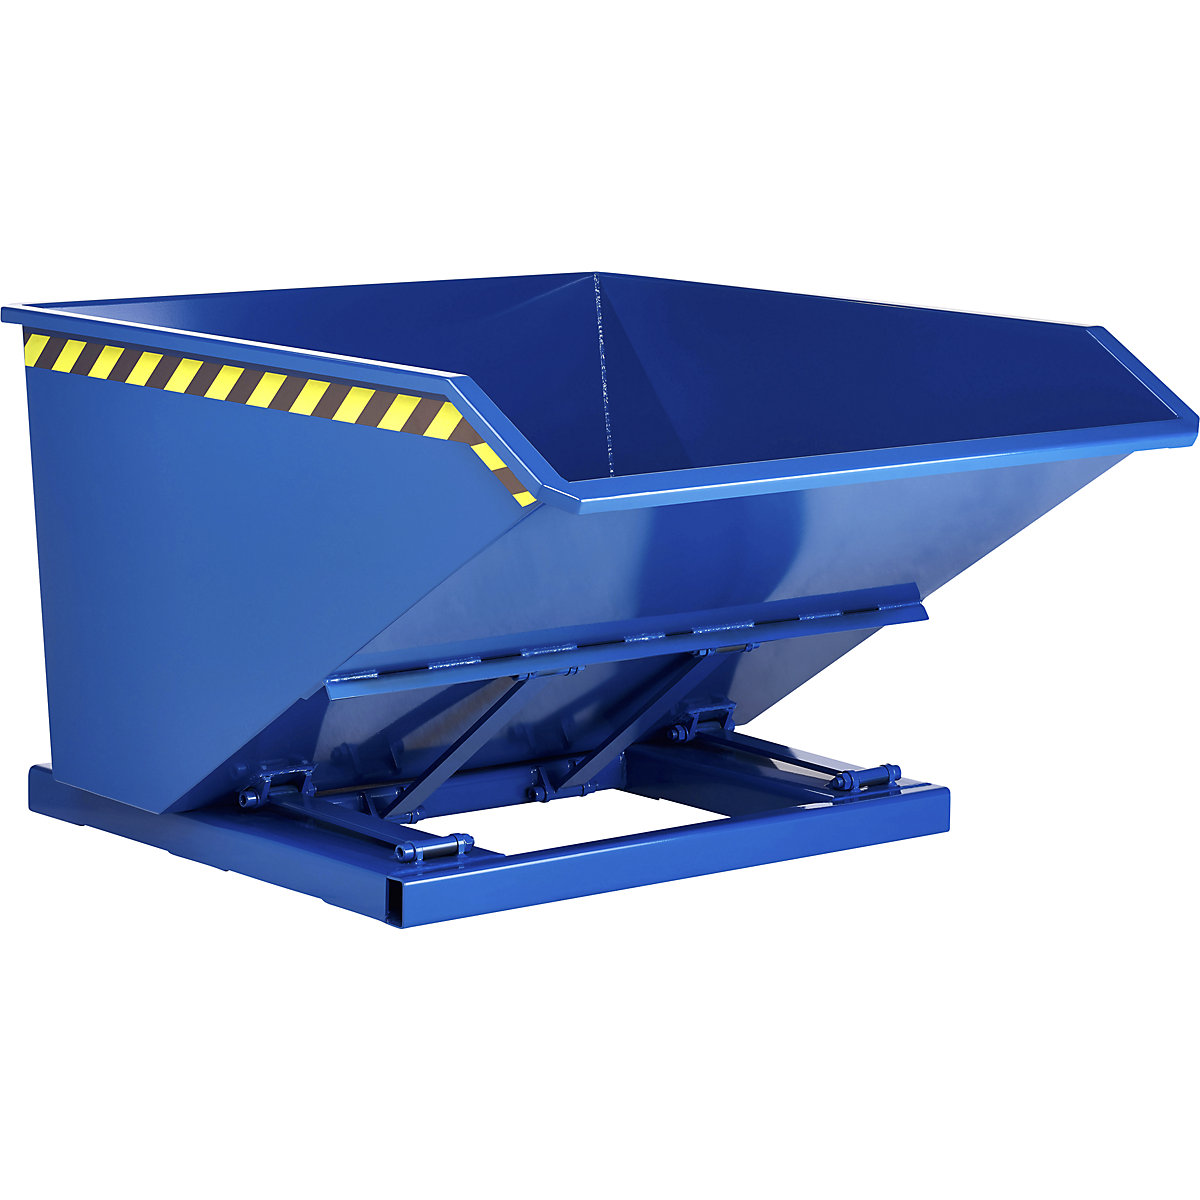 Tilting skip, low front edge height, capacity 0.3 m³, gentian blue RAL 5010